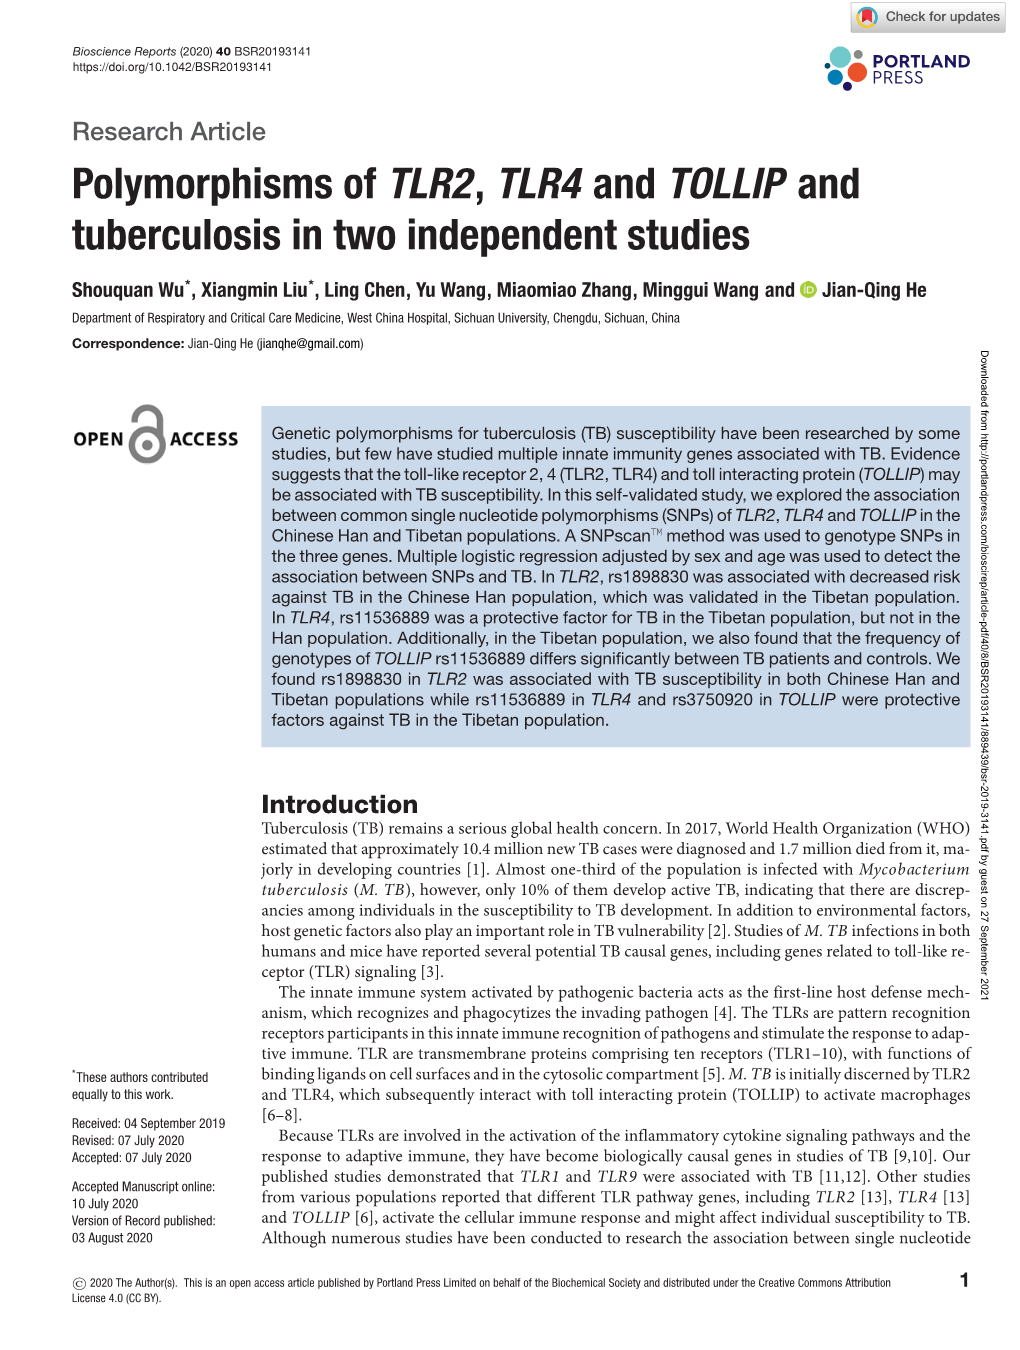 Polymorphisms of TLR2, TLR4 and TOLLIP and Tuberculosis in Two Independent Studies